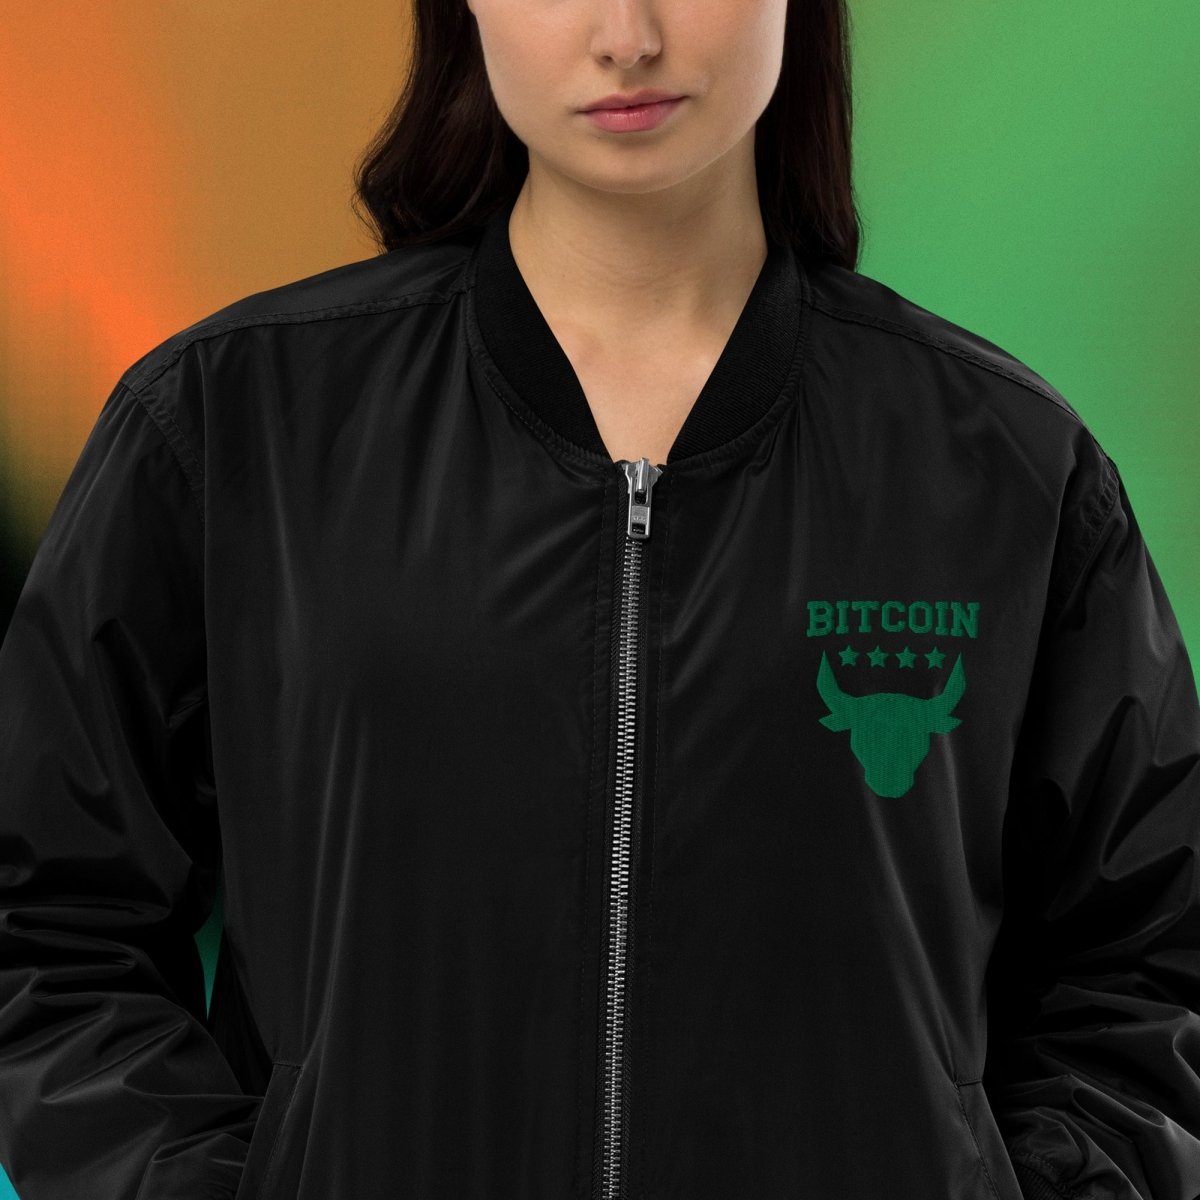 Bitcoin Clothing - Bitcoin Bull Bomber Jacket worn by female model (front view). Available at NEONCRYPTO STORE.